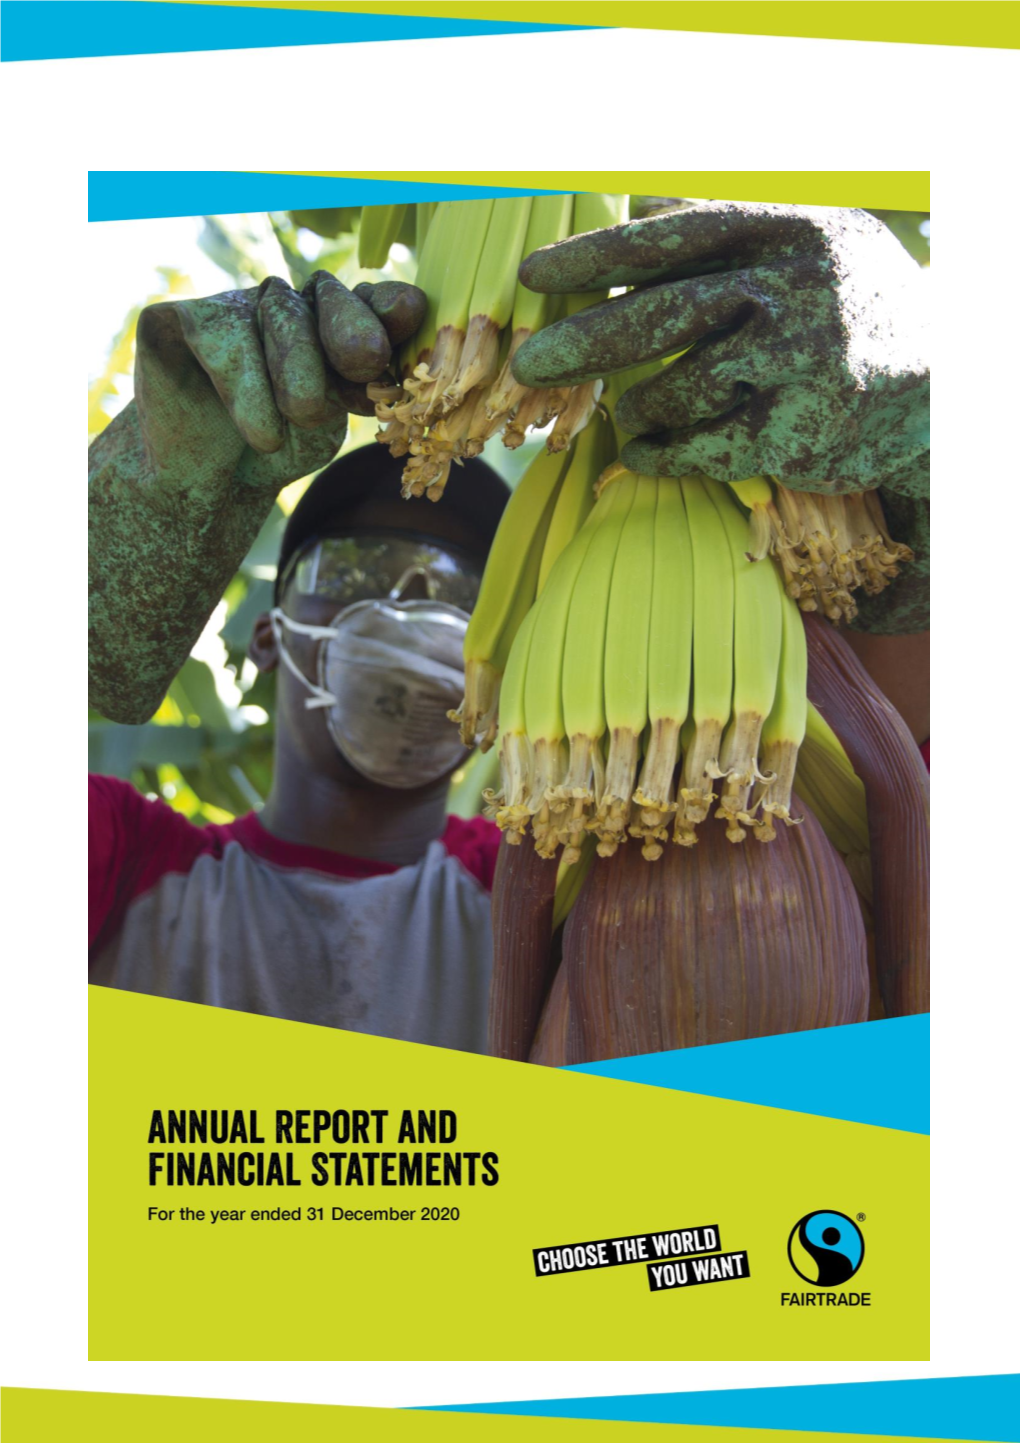 Read the 2020 Annual Report and Financial Statements (Pdf)